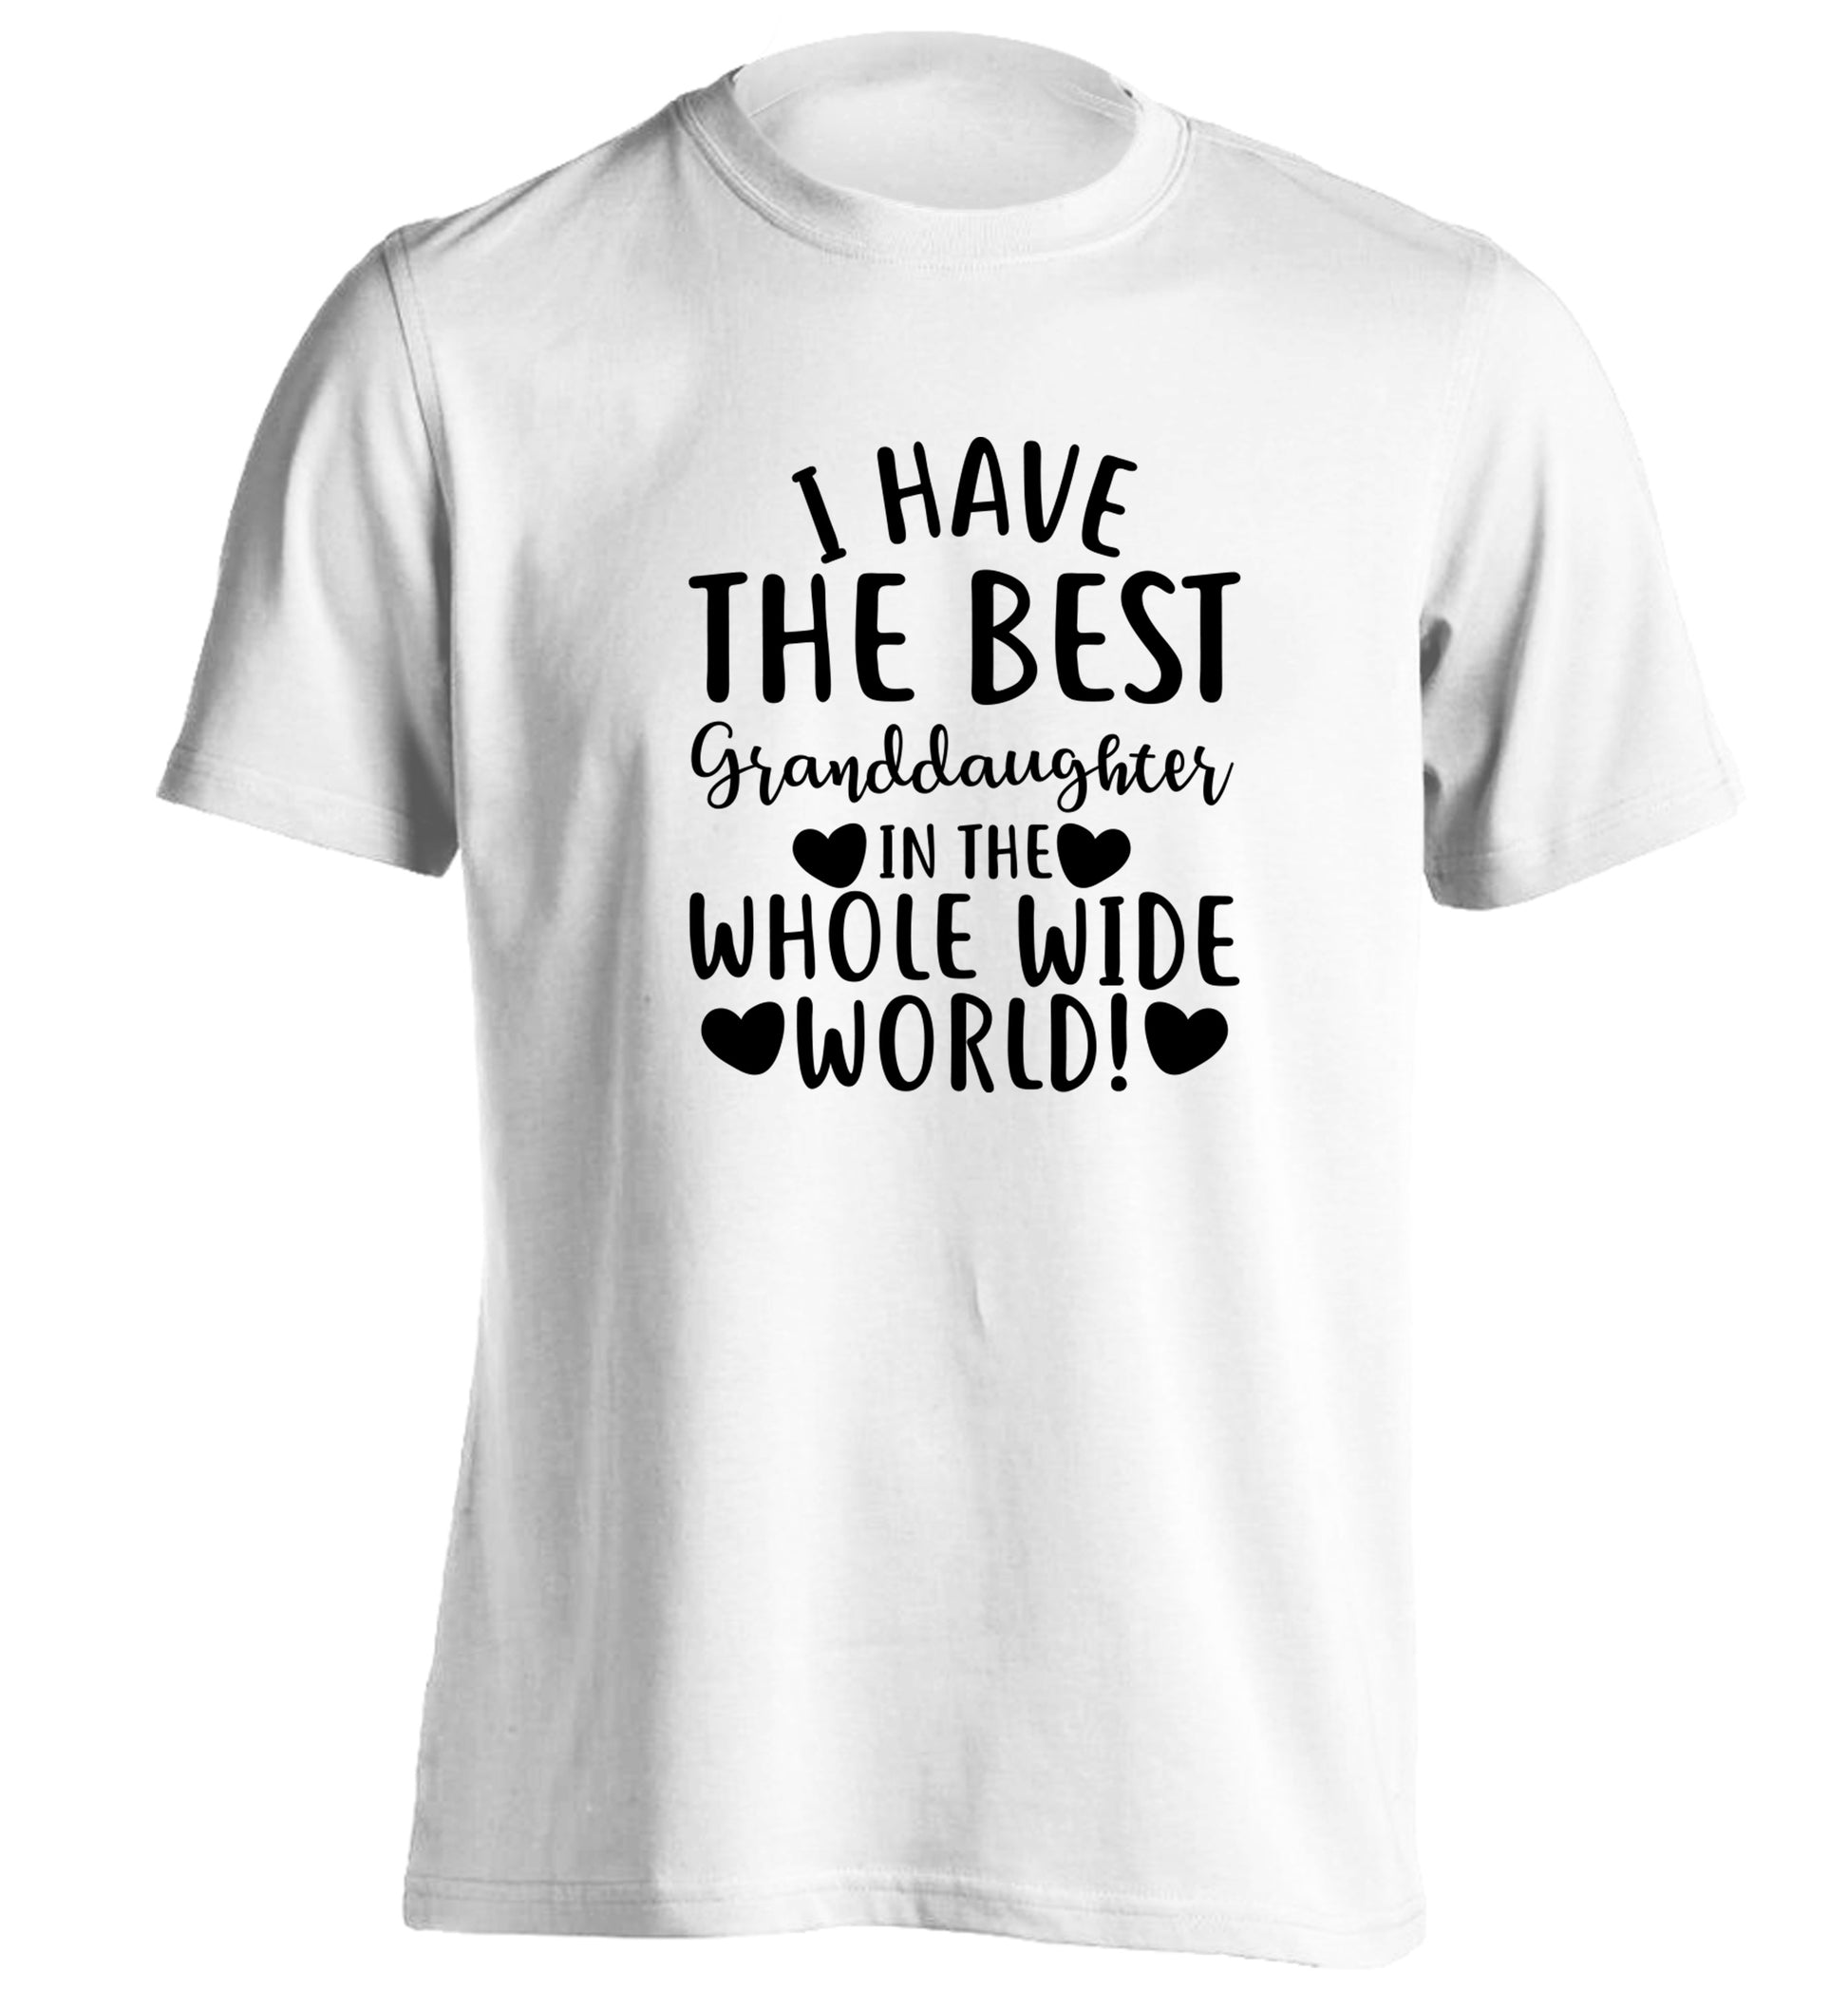 I have the best granddaughter in the whole wide world! adults unisex white Tshirt 2XL